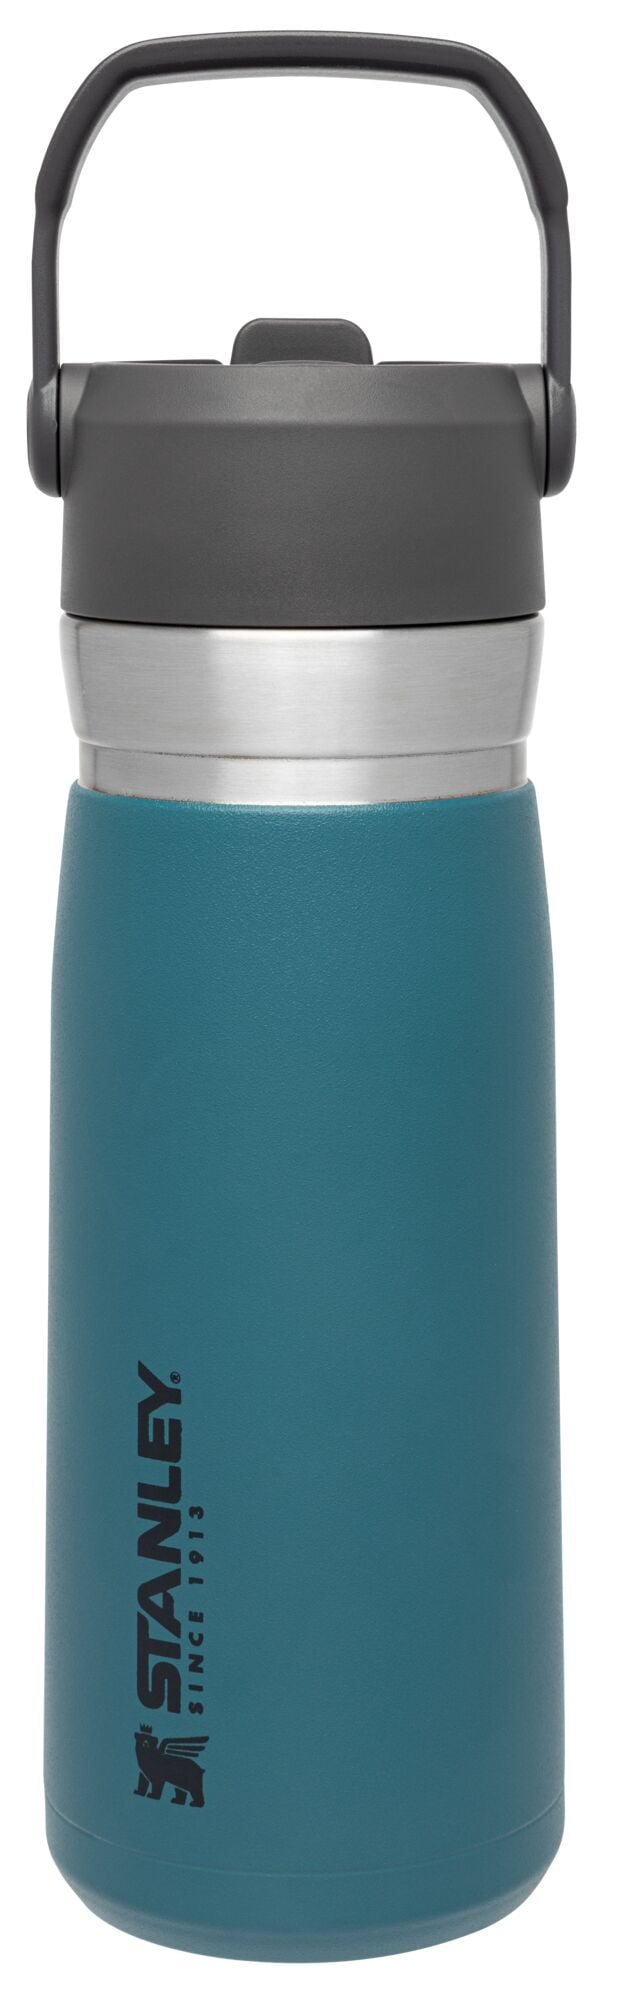 STANLEY 22 oz Lagoon Blue and Gray Insulated Stainless Steel Water Bottle with Straw and Flip-Top Lid